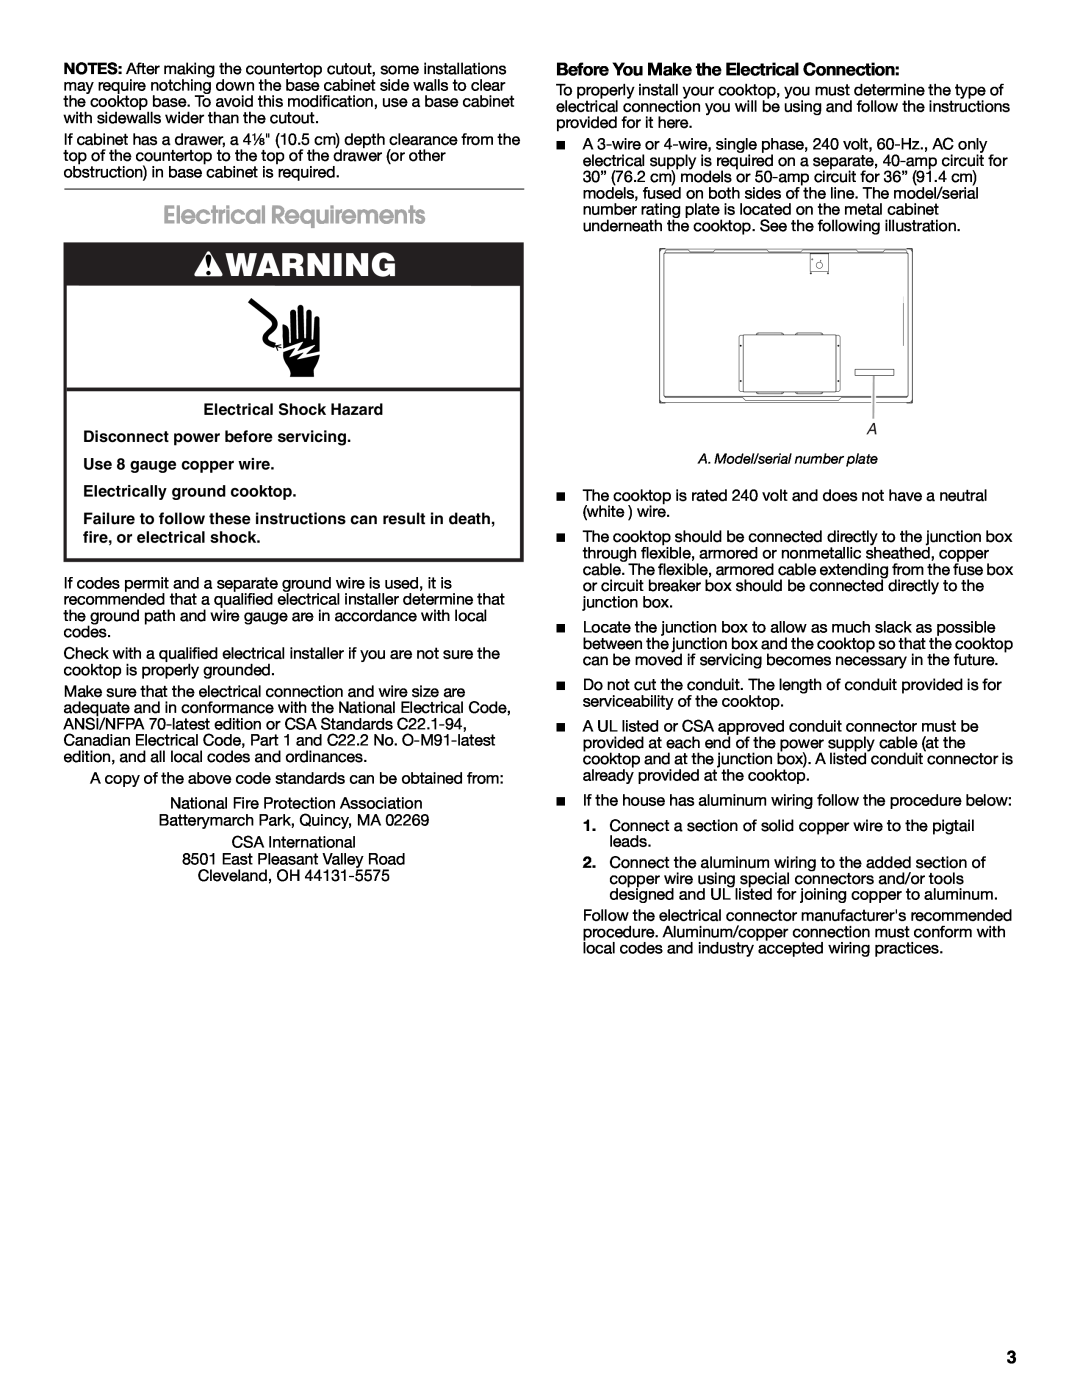 Maytag W10274255A installation instructions Electrical Requirements, Before You Make the Electrical Connection 